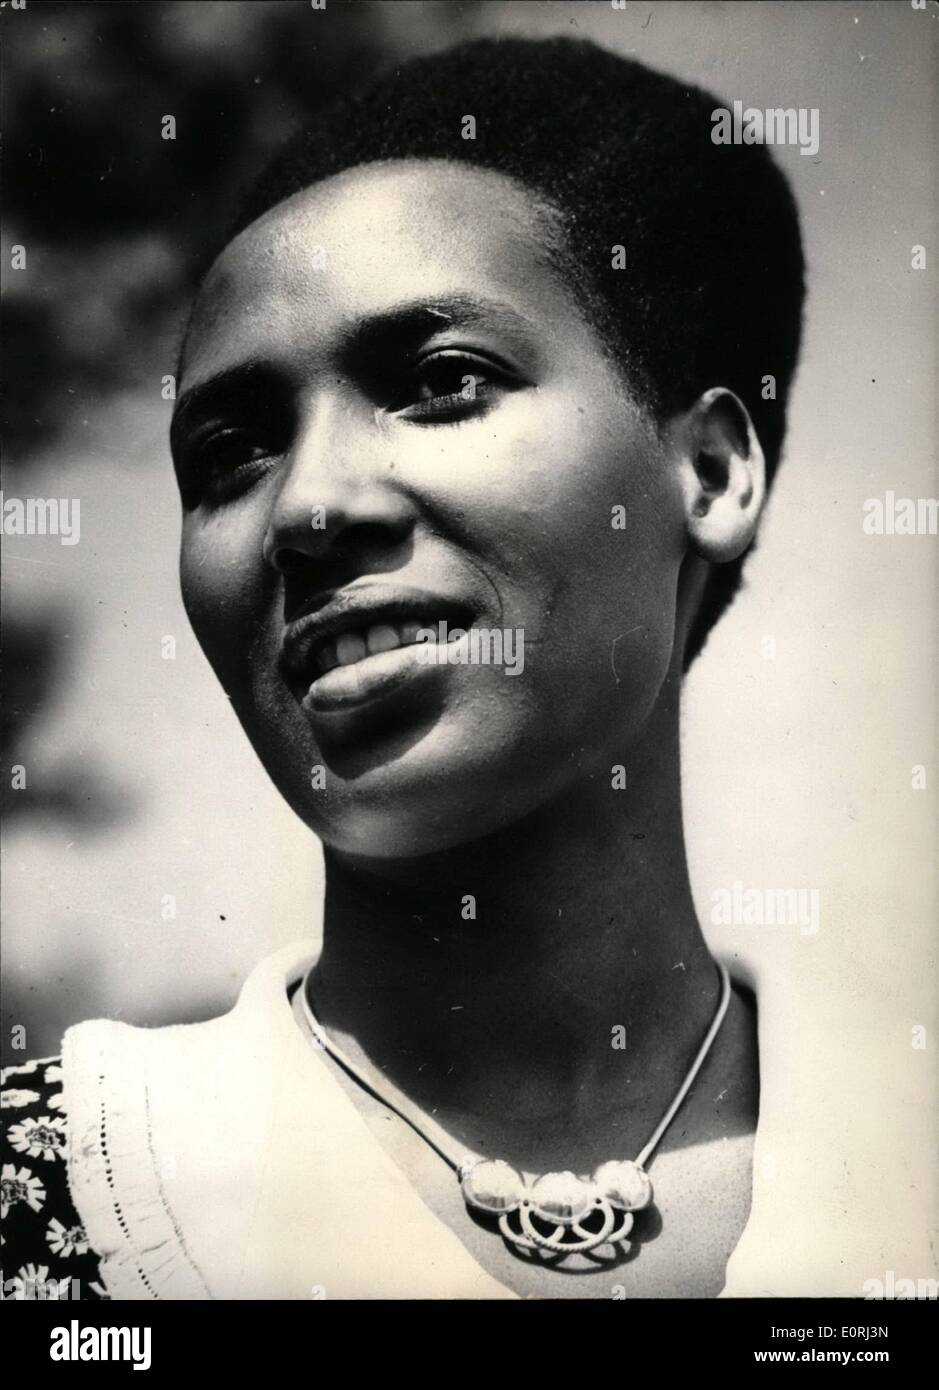 Nov. 11, 1959 - Belgium Tackles Colonial Problem After Recent Congo Outbreaks: The Recent Outbreaks In The Belgian Congo Seem To Be Greatly Worrying The Belgian Government. King Baudouin Is Reported To Have Invited The Bami (Sultans) Of Ruanda And Of Urundi. Photo shows A Recent Portrait Of The Wife Of The Bami Of Urundi. Stock Photo